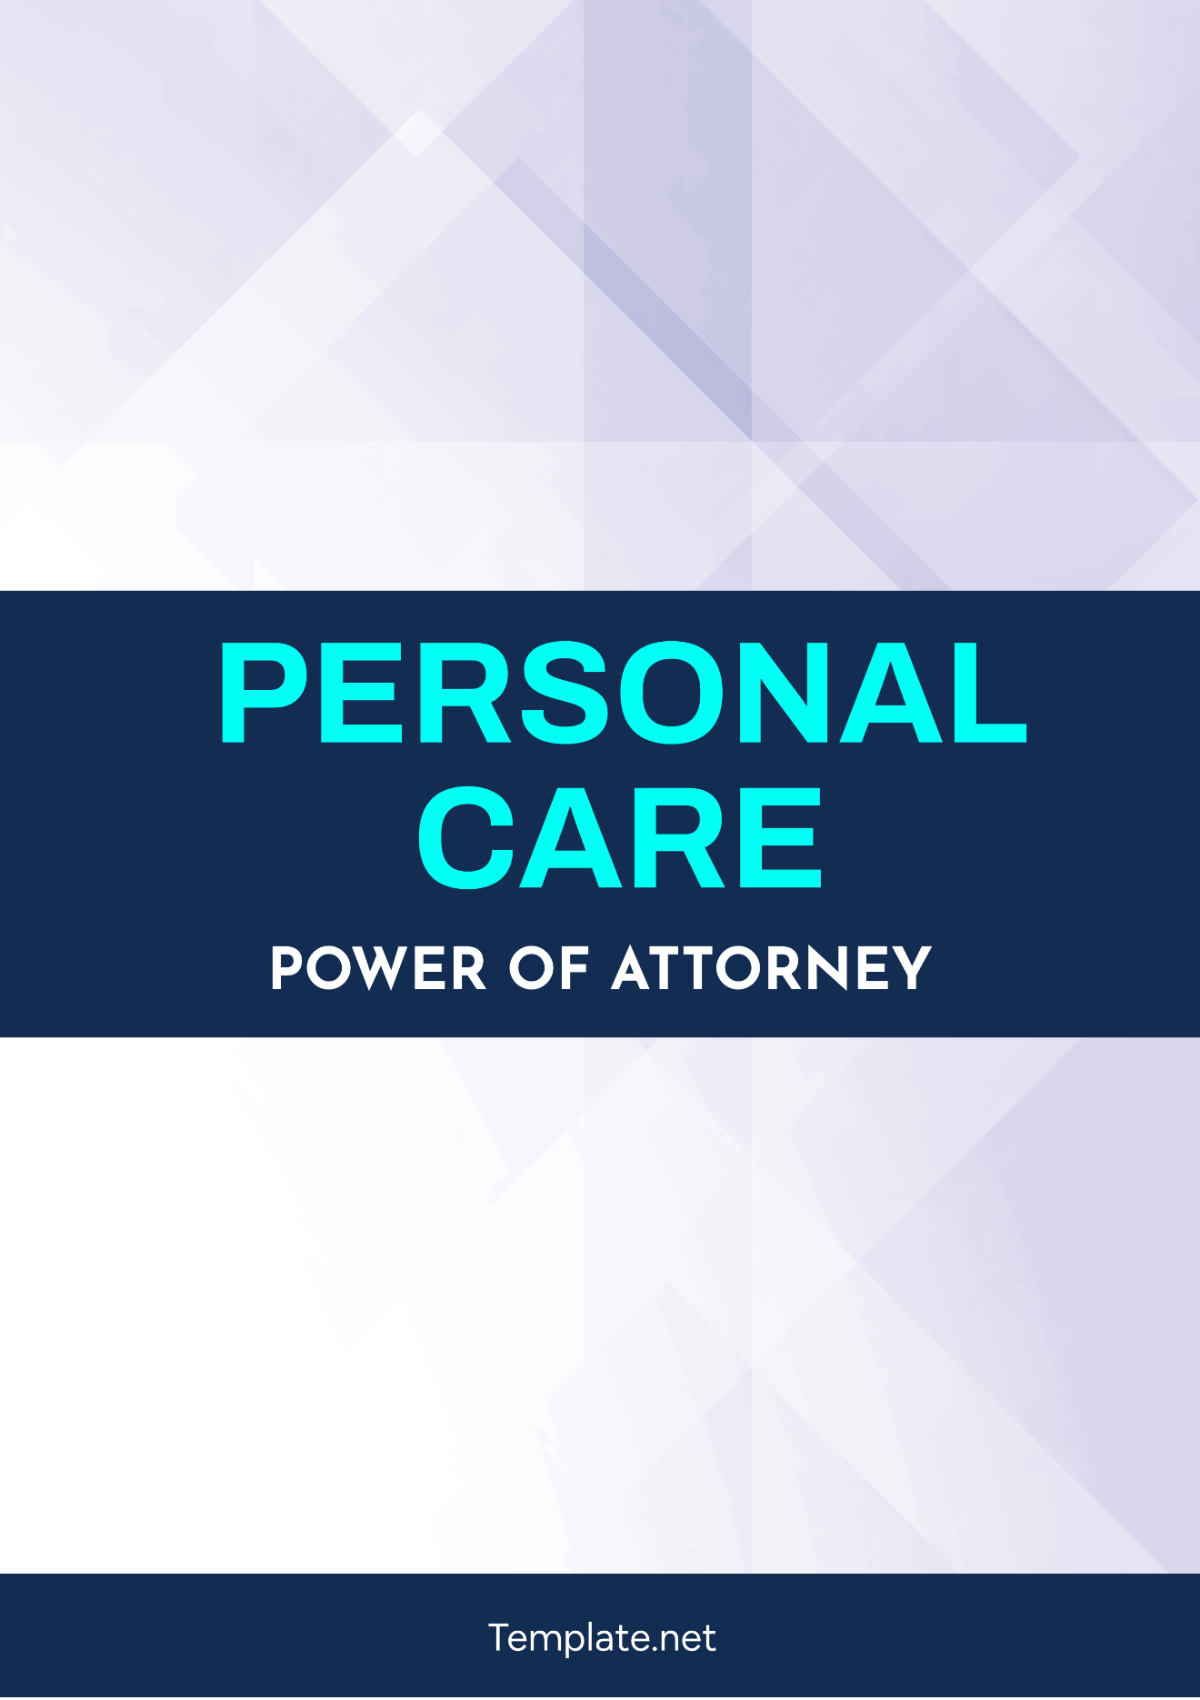 Personal Care Power of Attorney Template